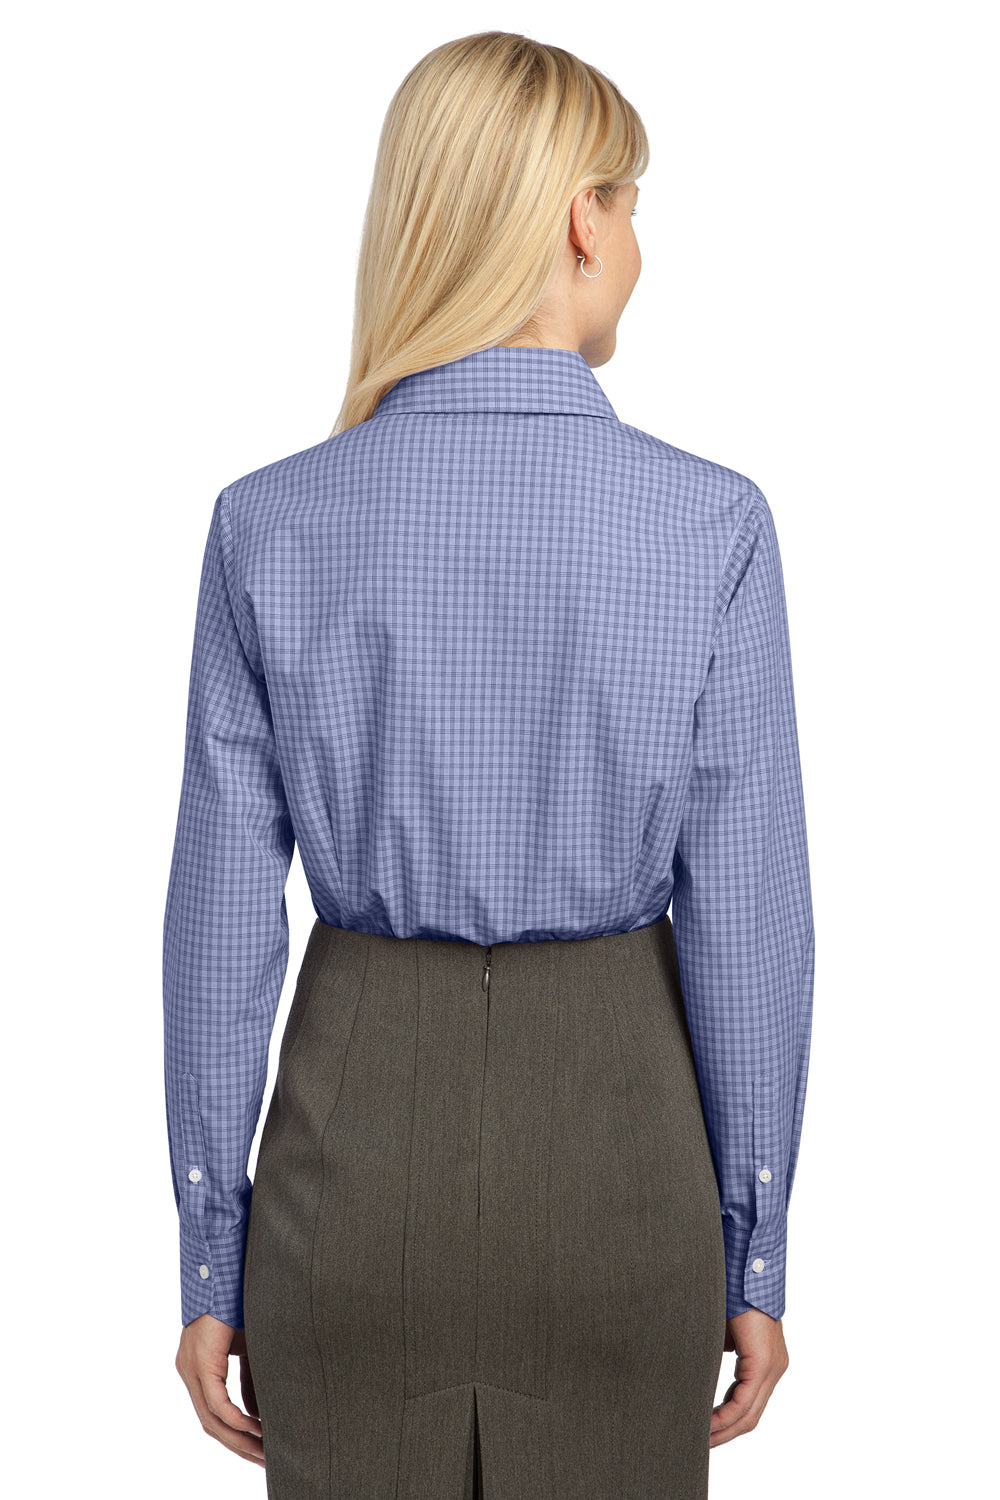 Port Authority L639 Womens Easy Care Wrinkle Resistant Long Sleeve Button Down Shirt Navy Blue Back